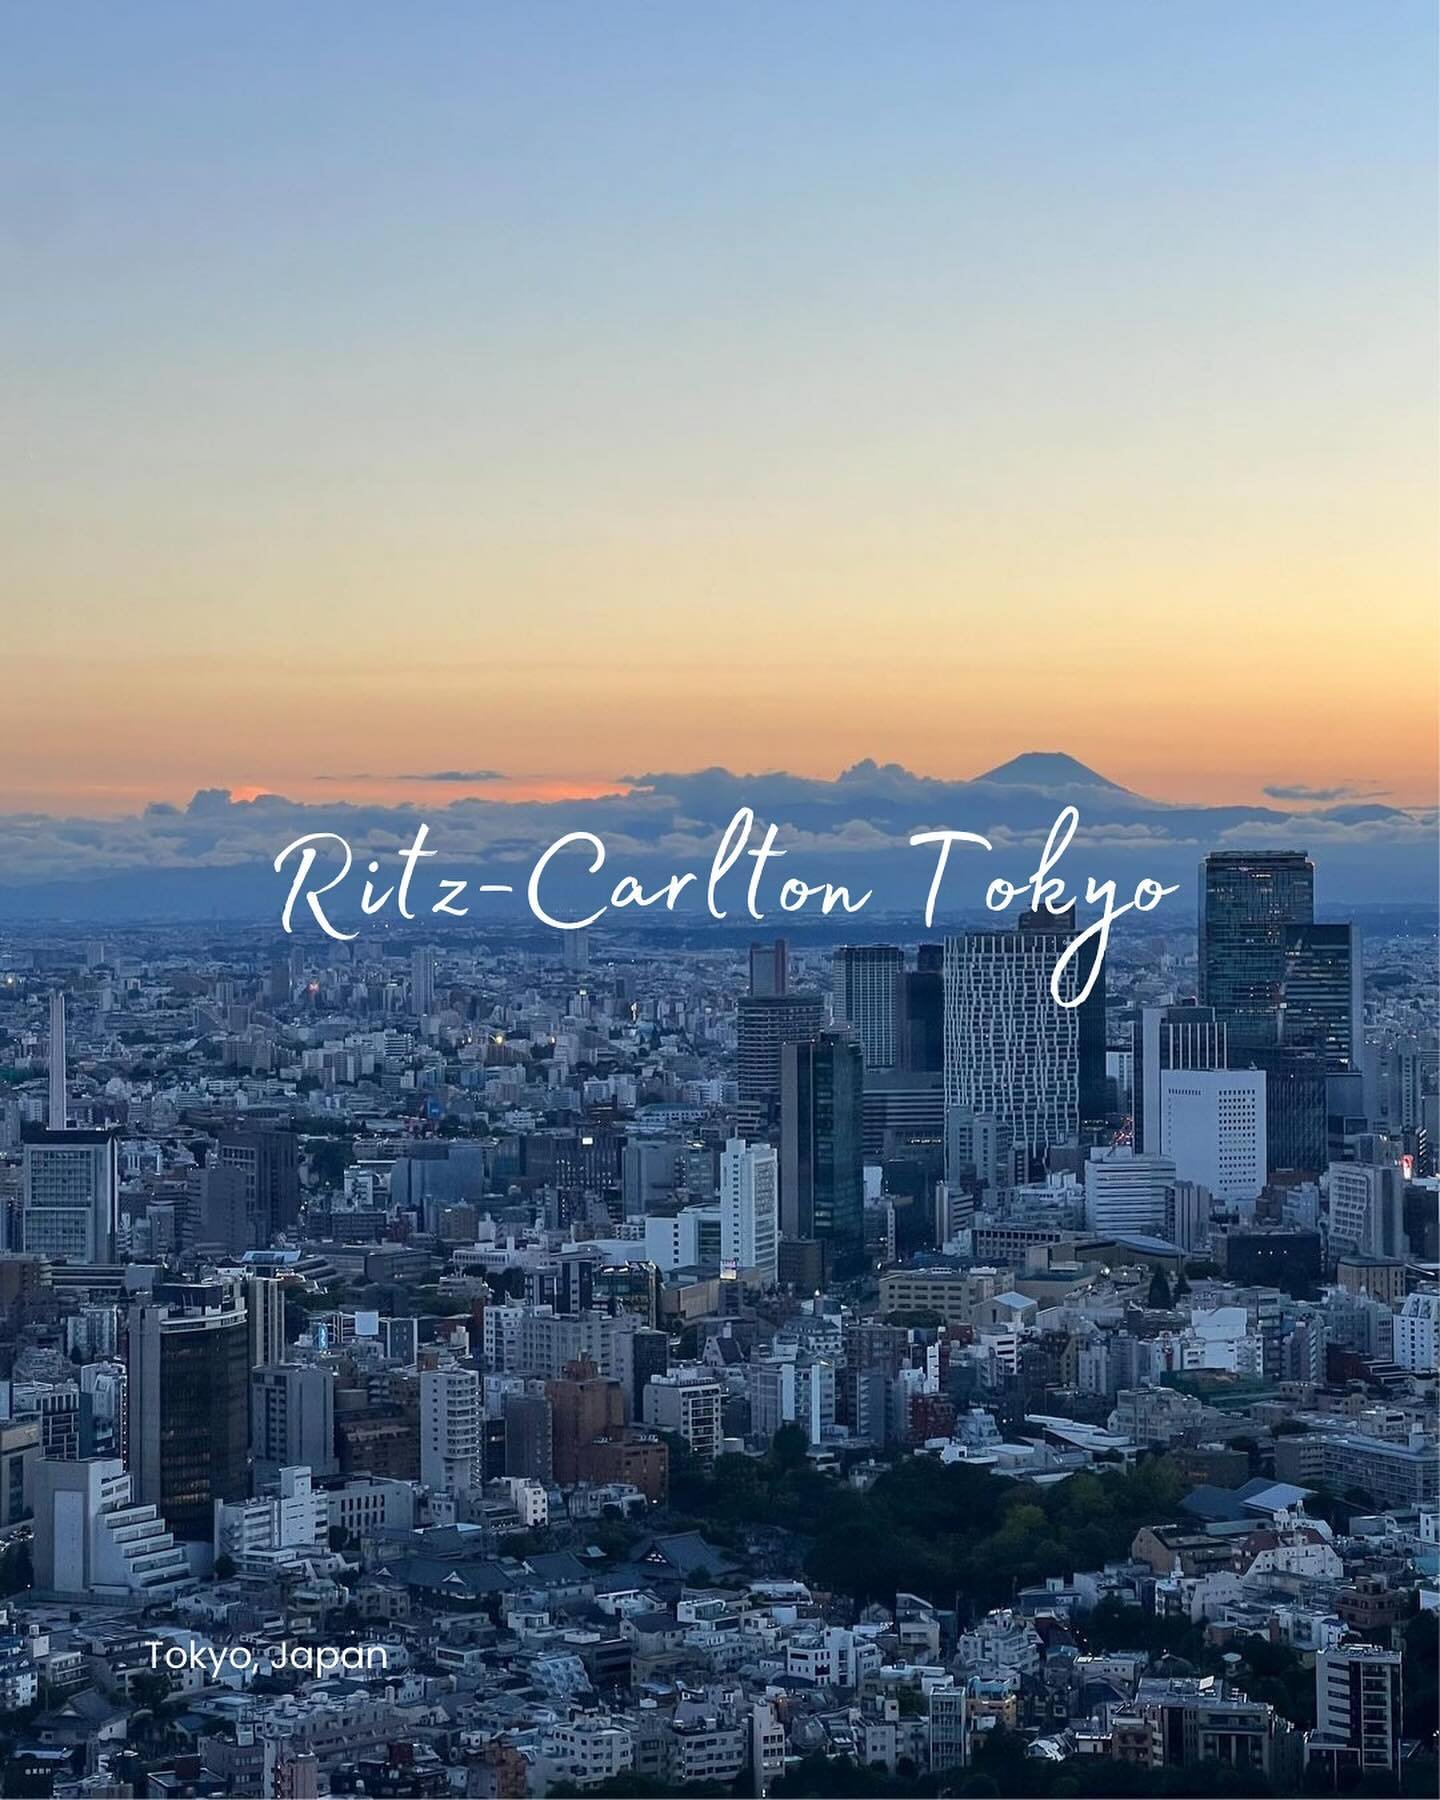 Unparalleled luxury amidst Japan&rsquo;s bustling capital city. 🍷✨ 

The @ritzcarltontokyo is perched atop the illustrious 53-story Midtown Tower in Tokyo&rsquo;s vibrant Roppongi District, occupying the top 9 floors of the building. 🏯

With 245 gu